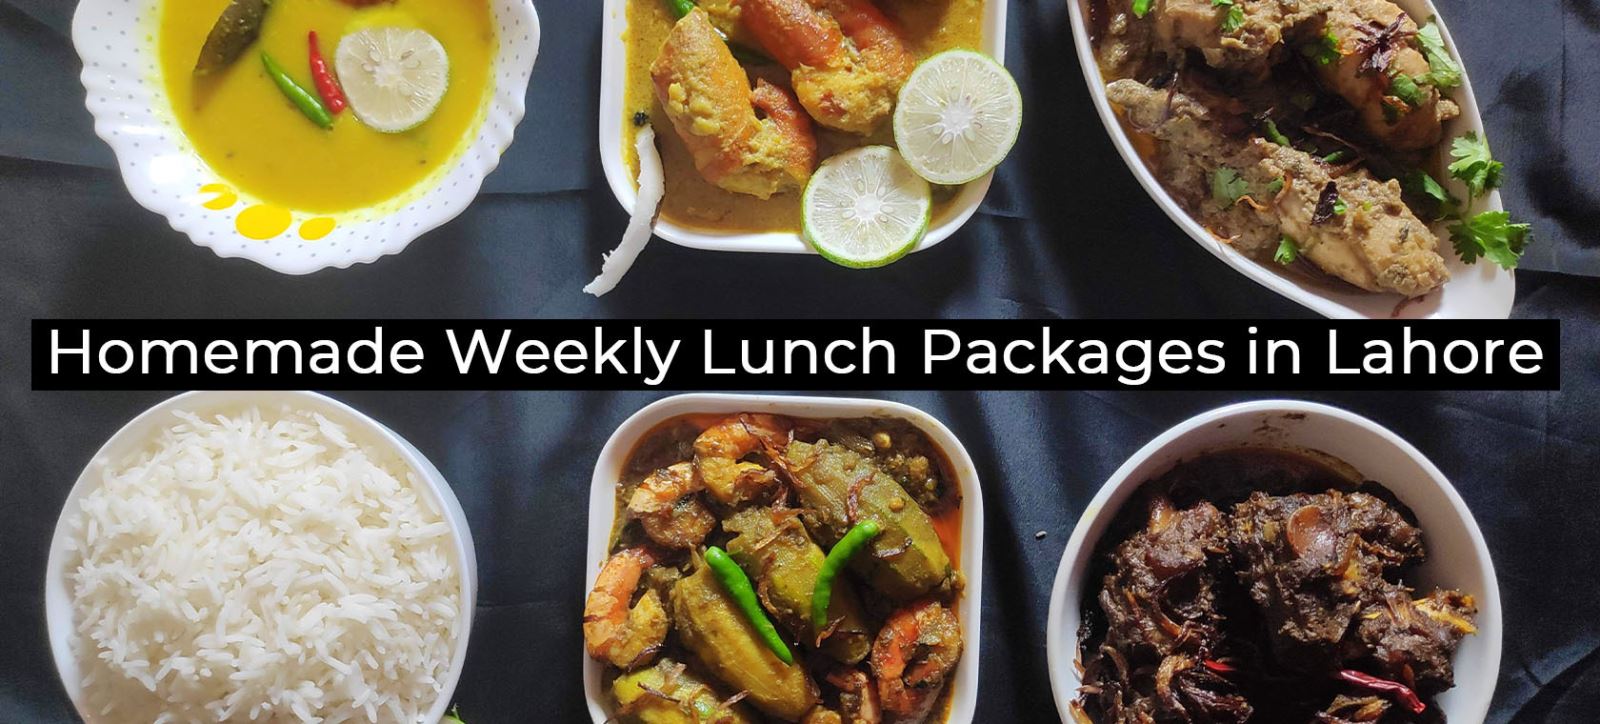 Best Homemade Weekly Lunch Packages in Lahore